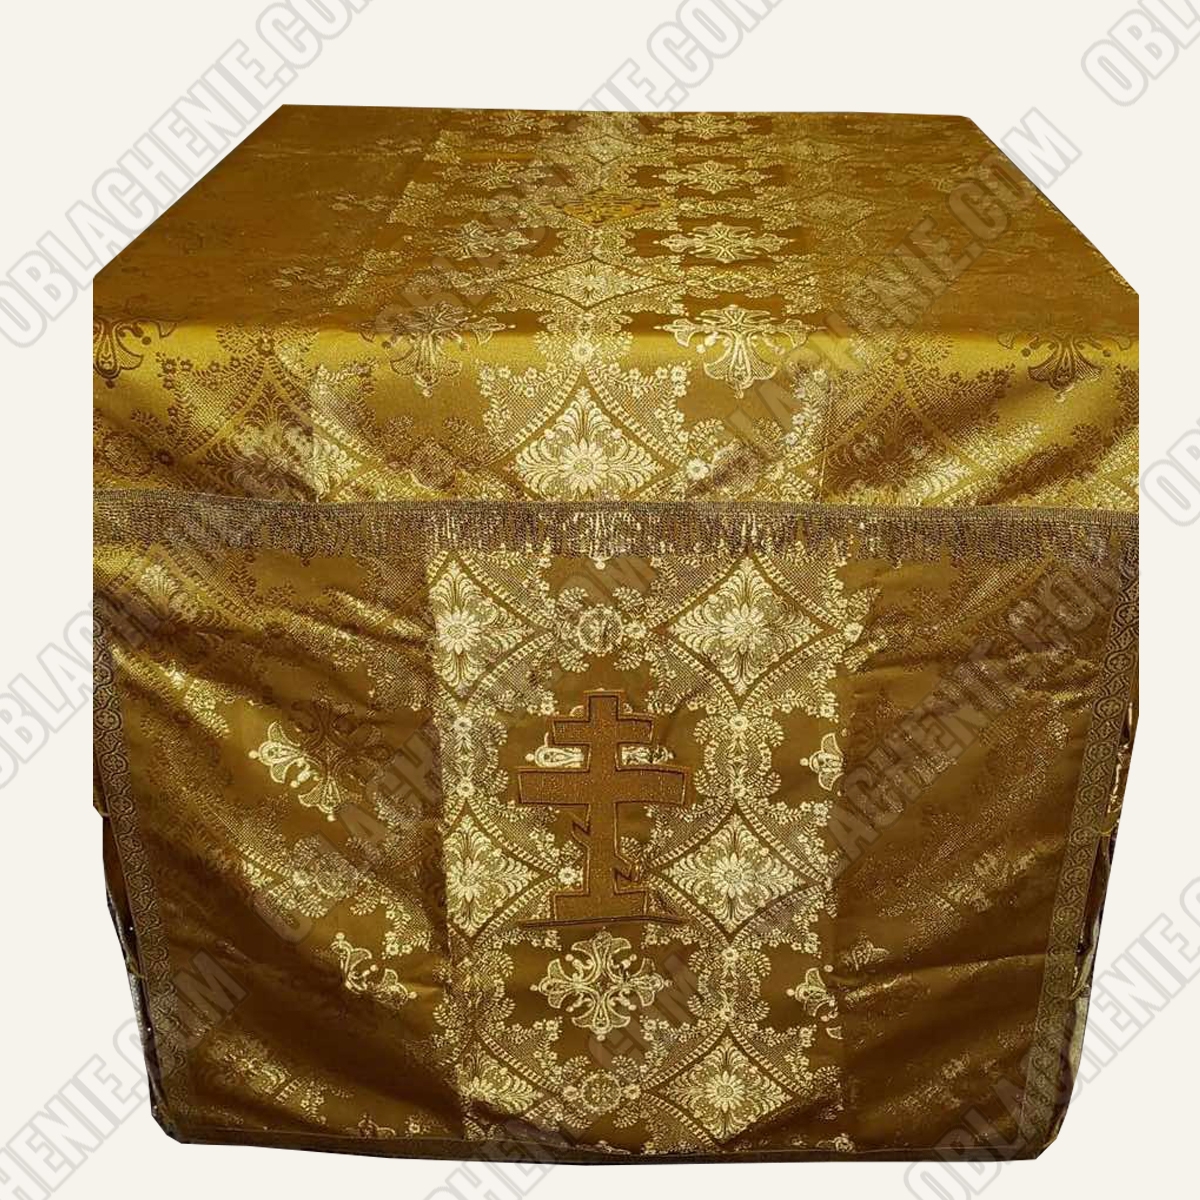 HOLY TABLE VESTMENTS 11126